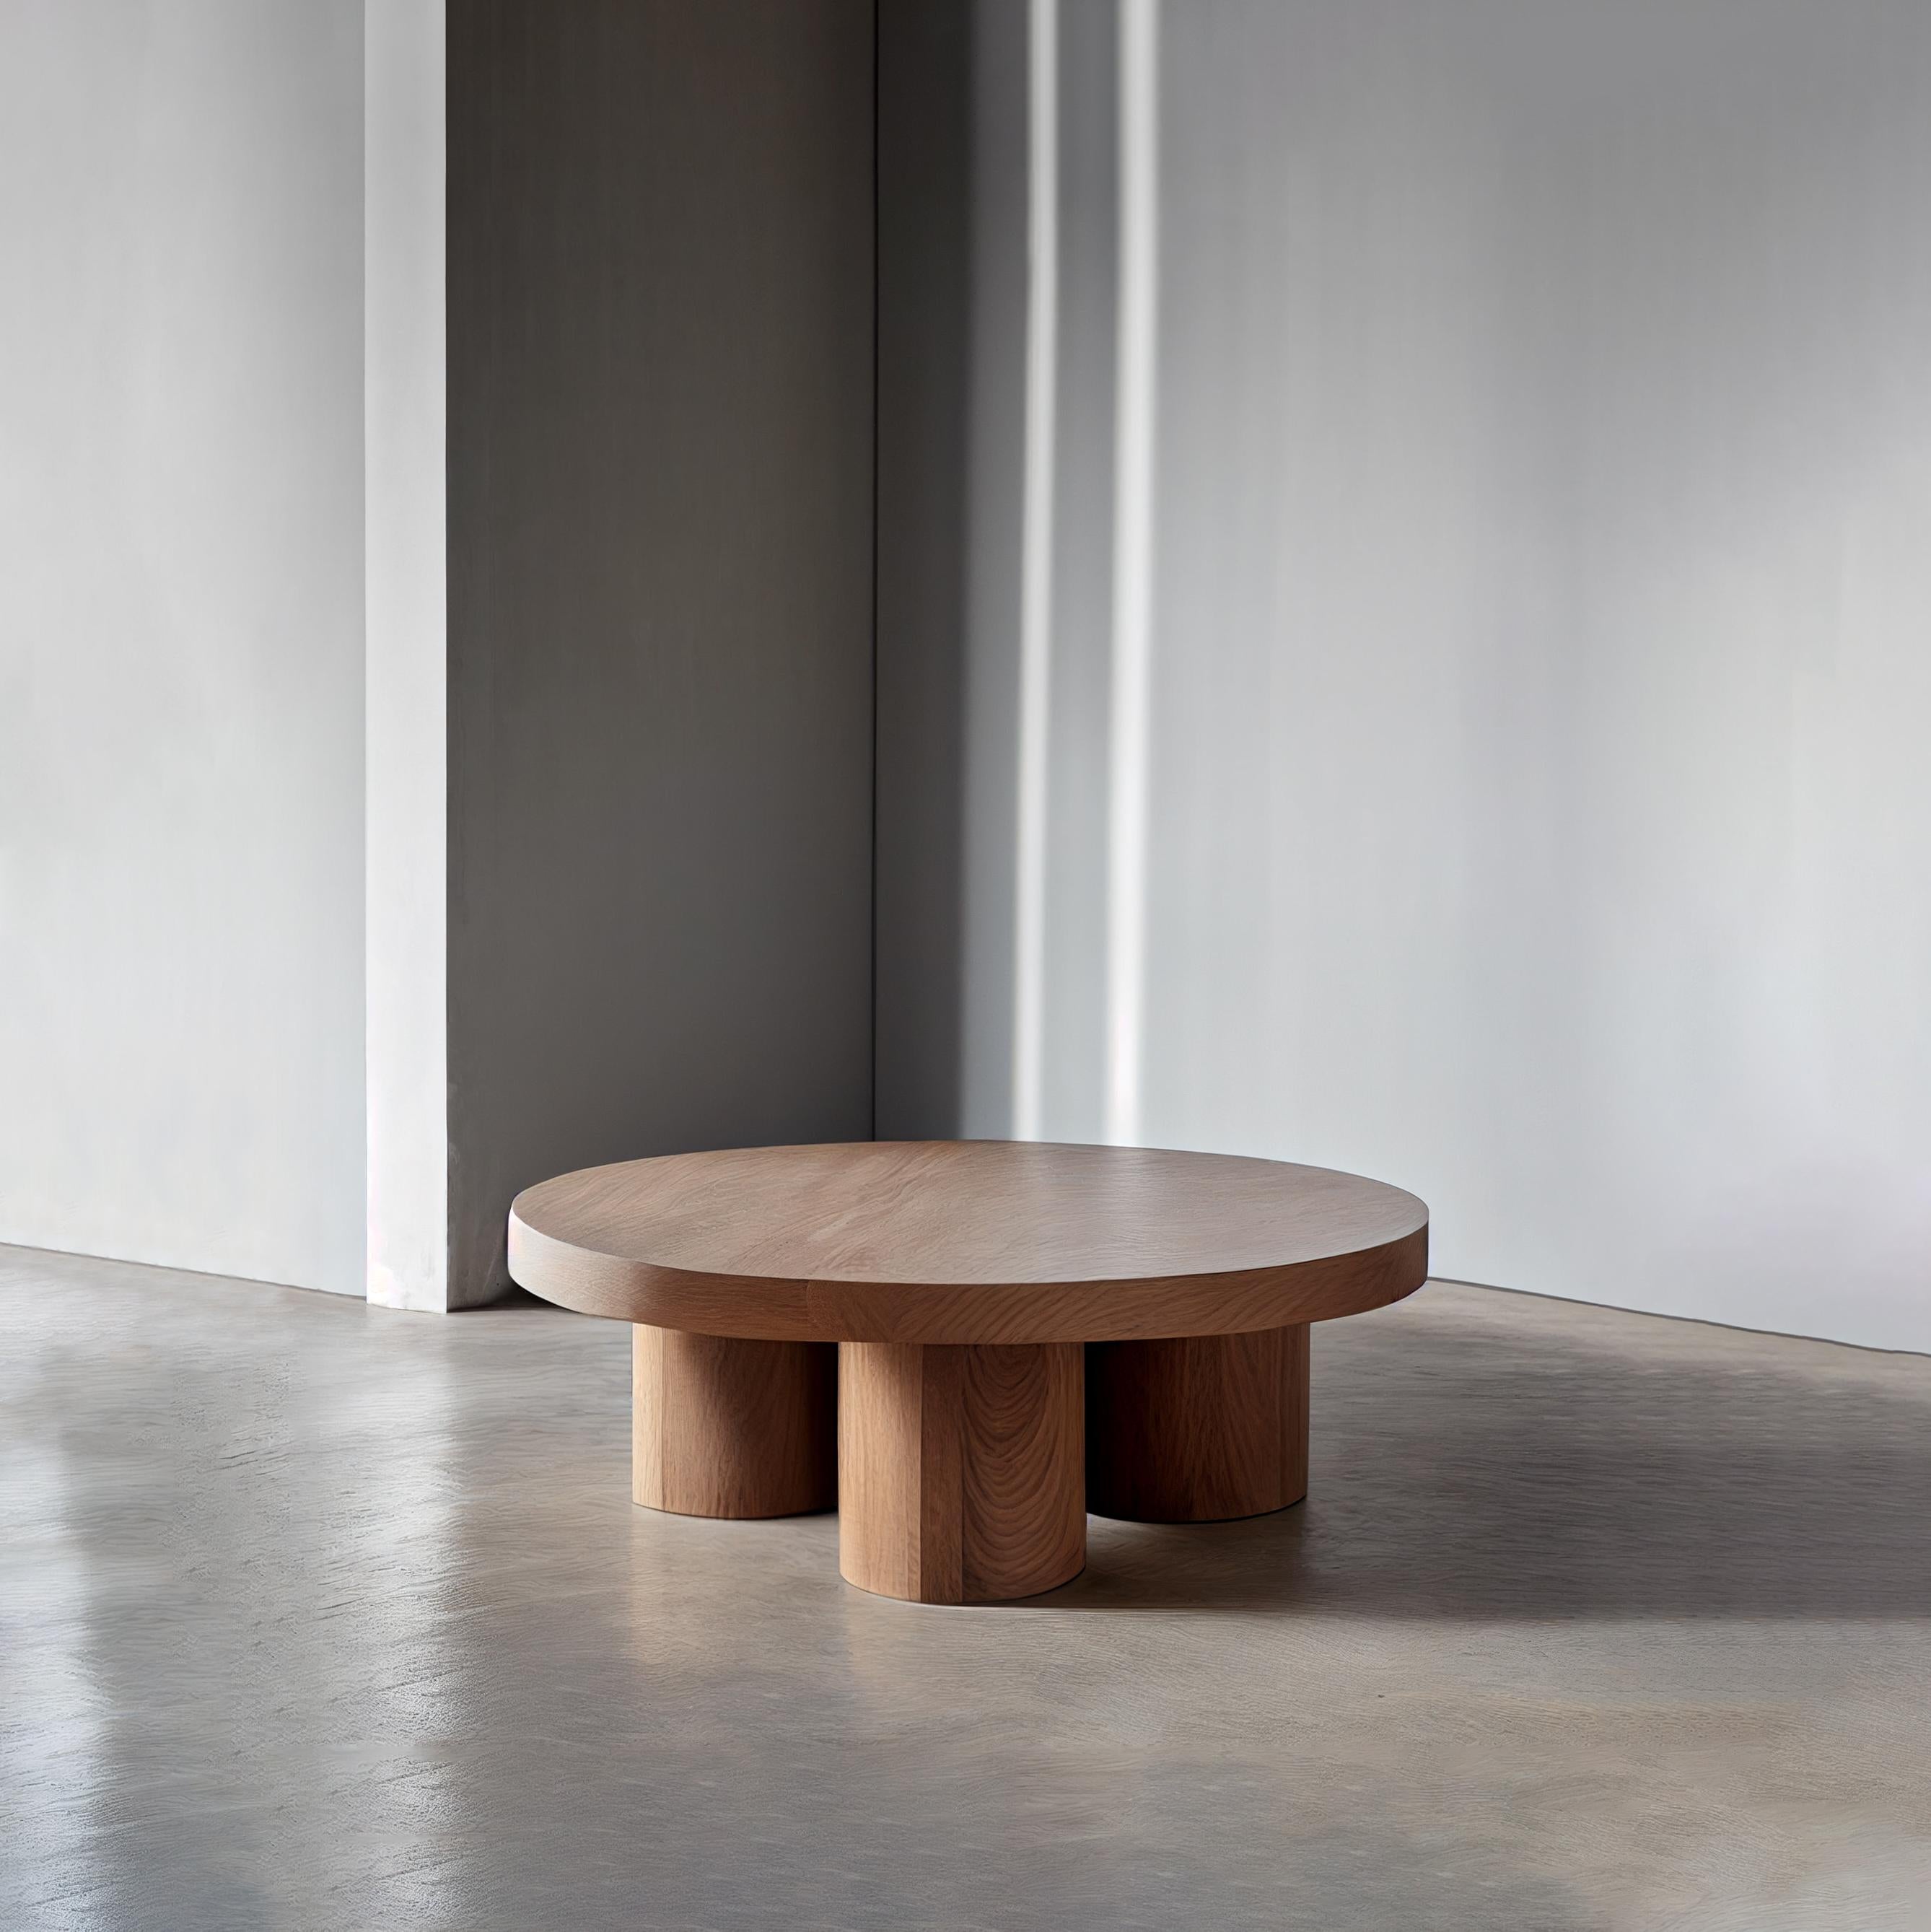 Brutalist round coffee table in red oak wood veneer, Podio by NONO

The NONO design team presents a coffee table that exudes elegance and modernity. The foundation of this piece is a cluster of cylindrical columns, providing a sturdy base for the